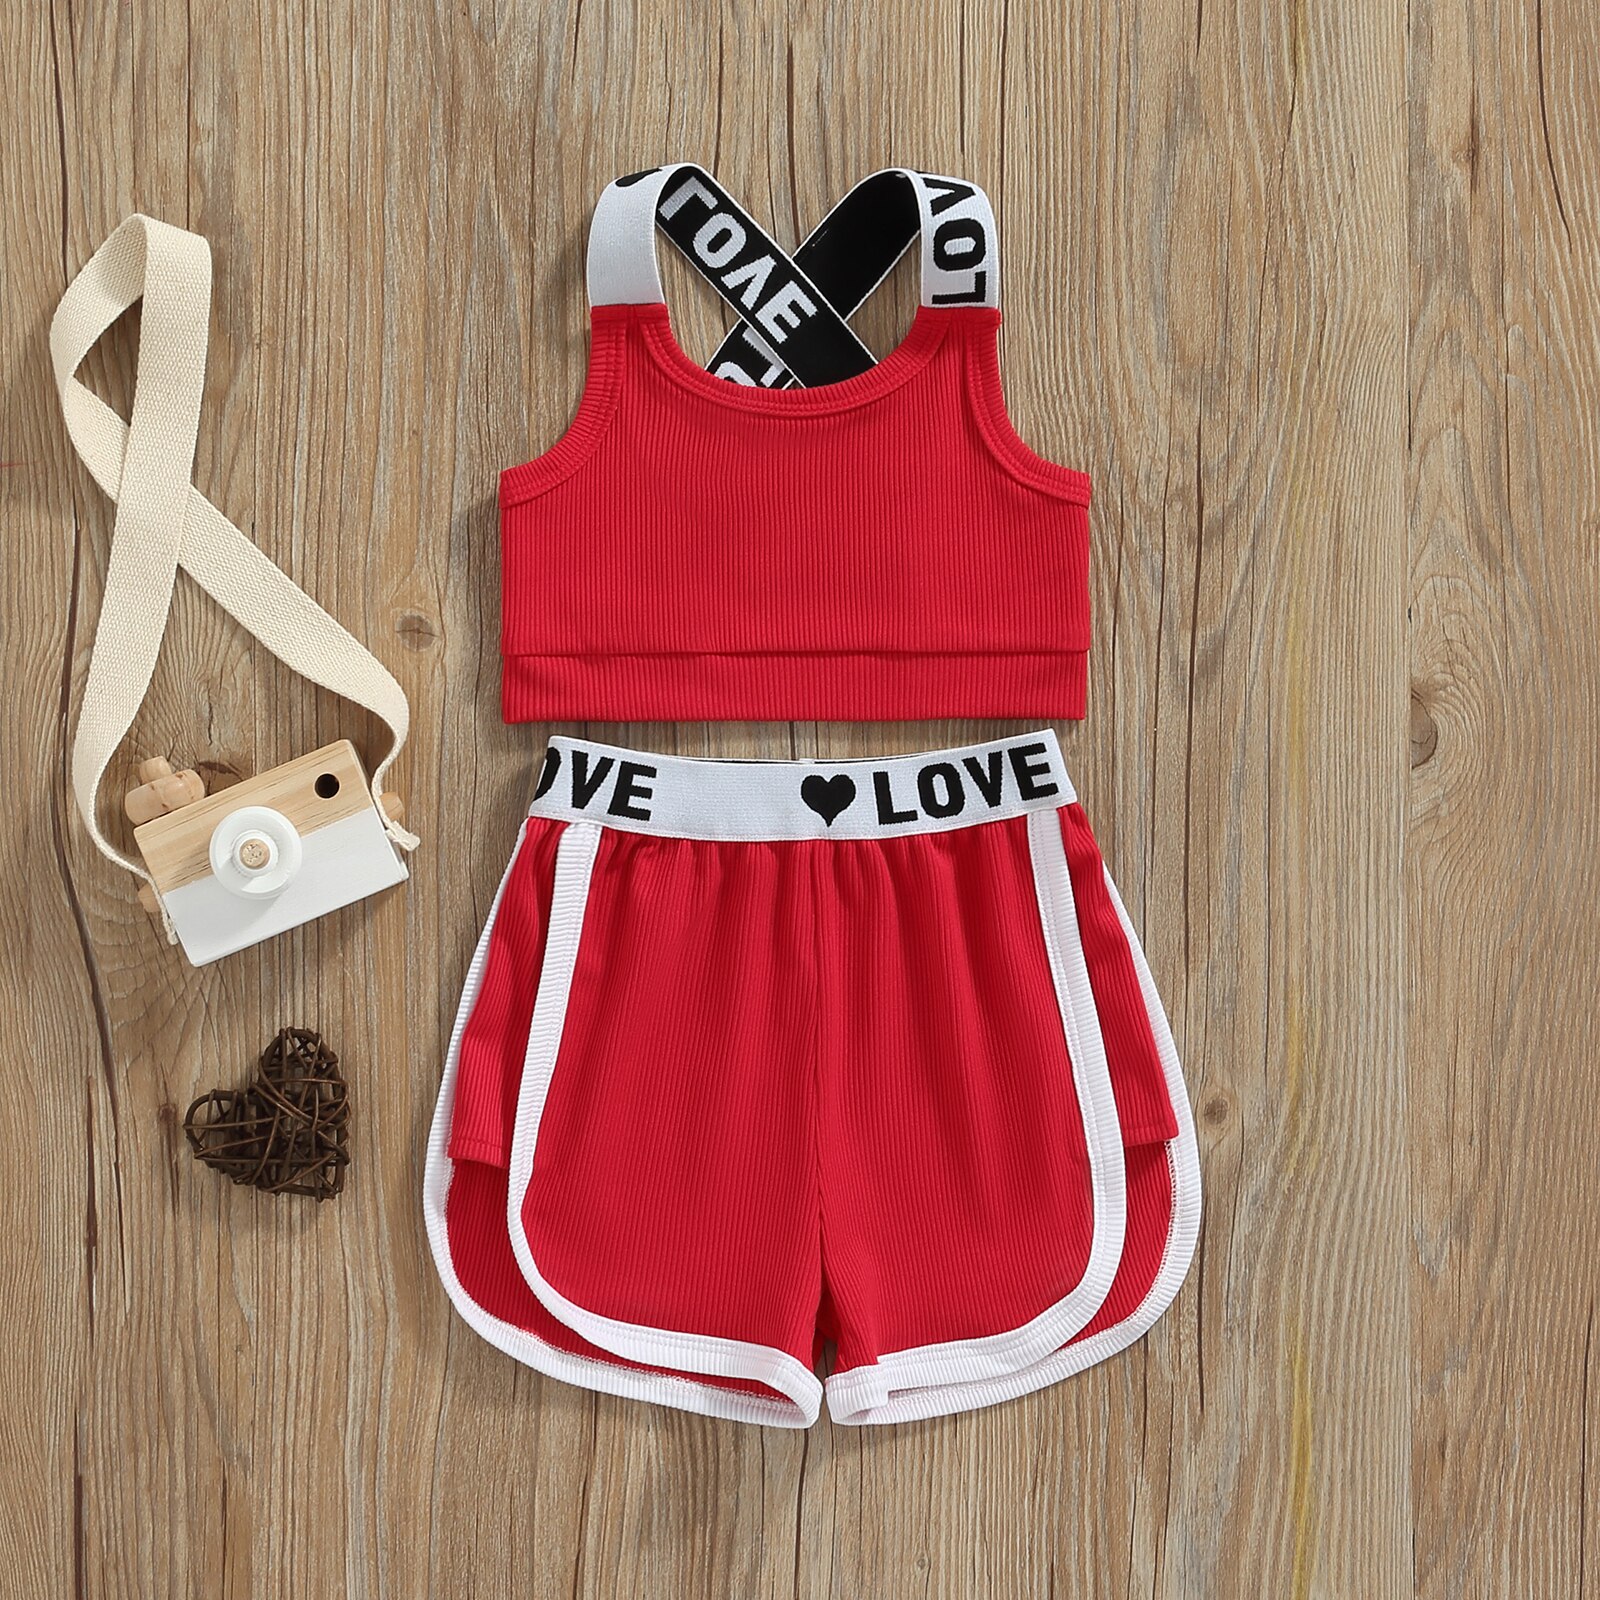 Fashion-Baby-Clothes-Set-Summer-Letter-Strap-Tank-Tops-Shorts-For-Girls-Set-Toddlers-2-Pieces-4